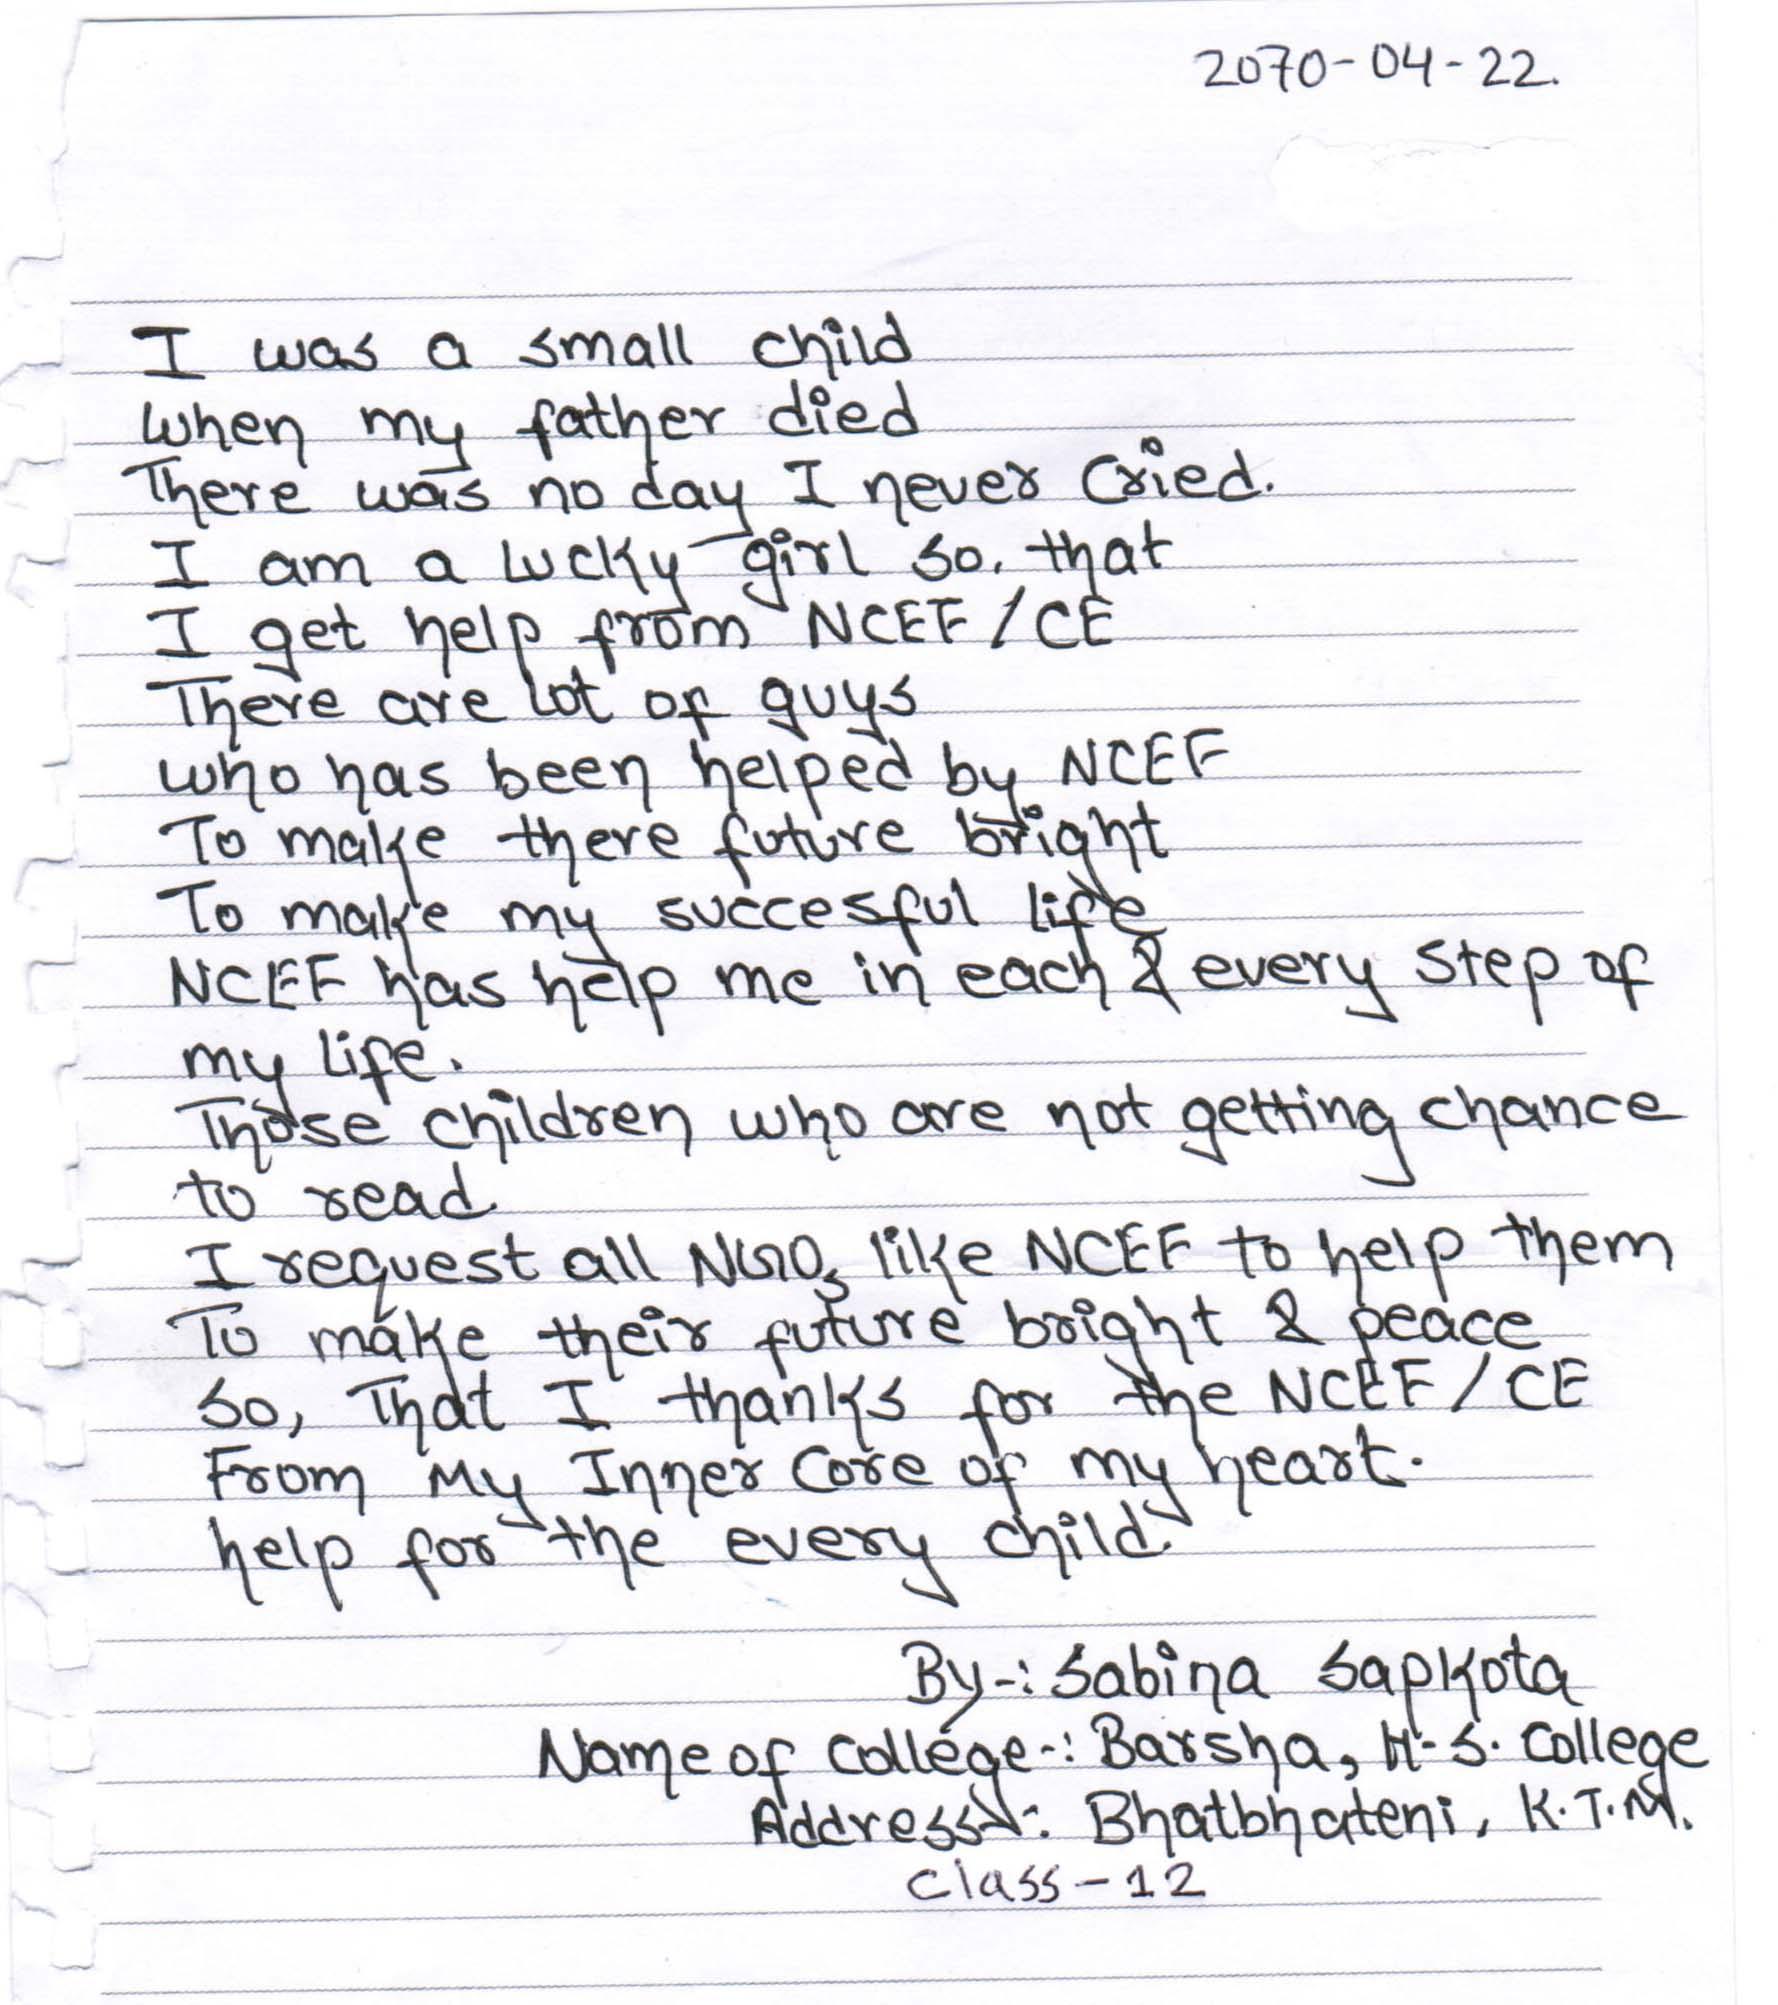 Poem by our Student Anita